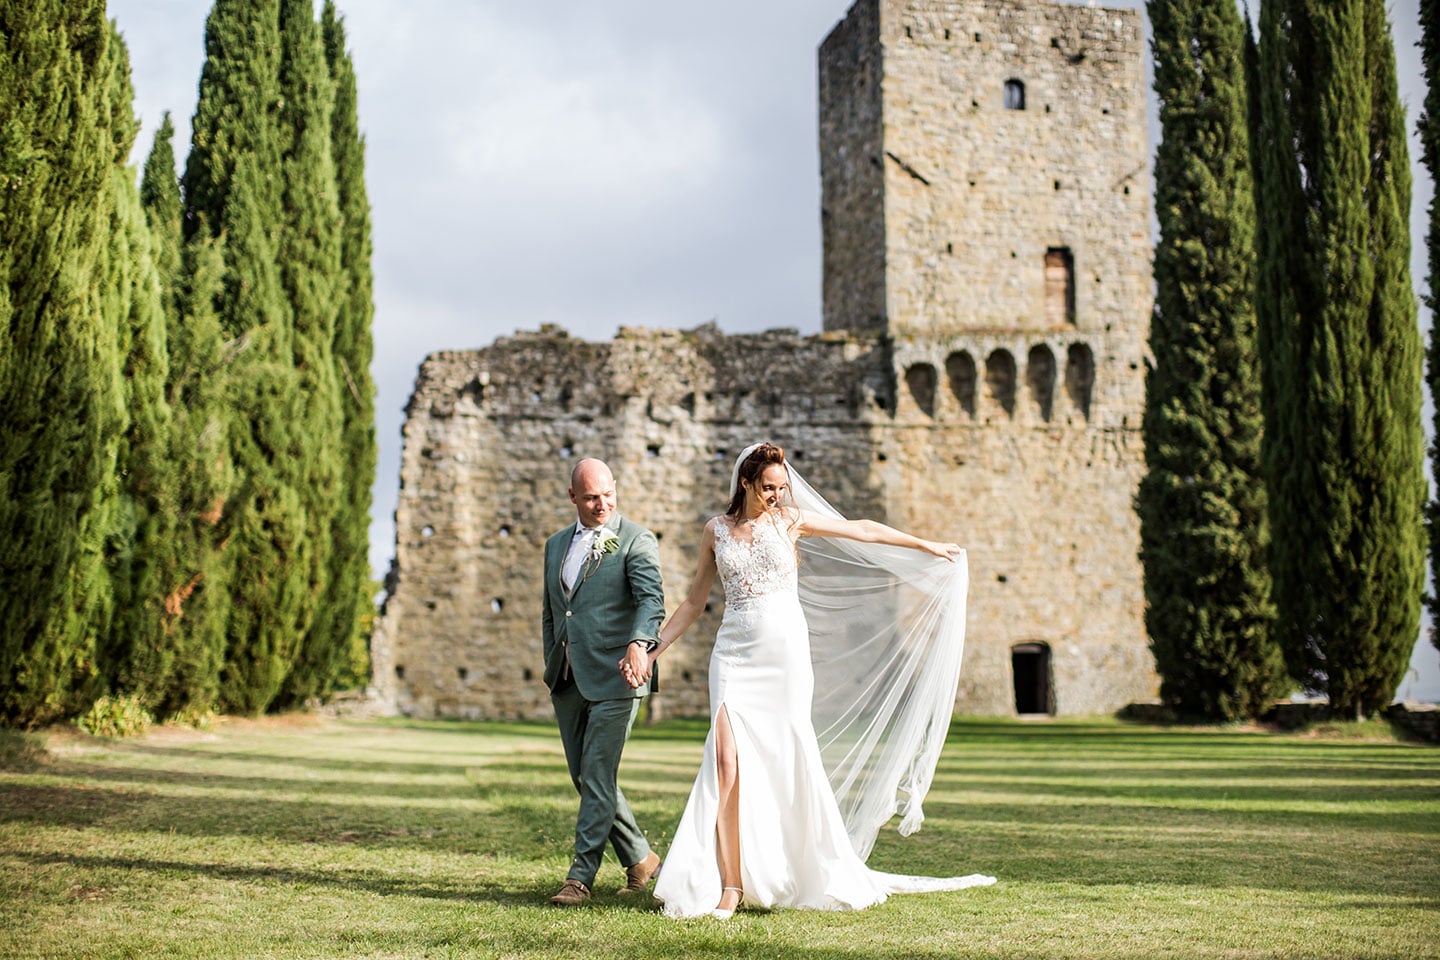 Wedding photography Tuscany at medieval castle